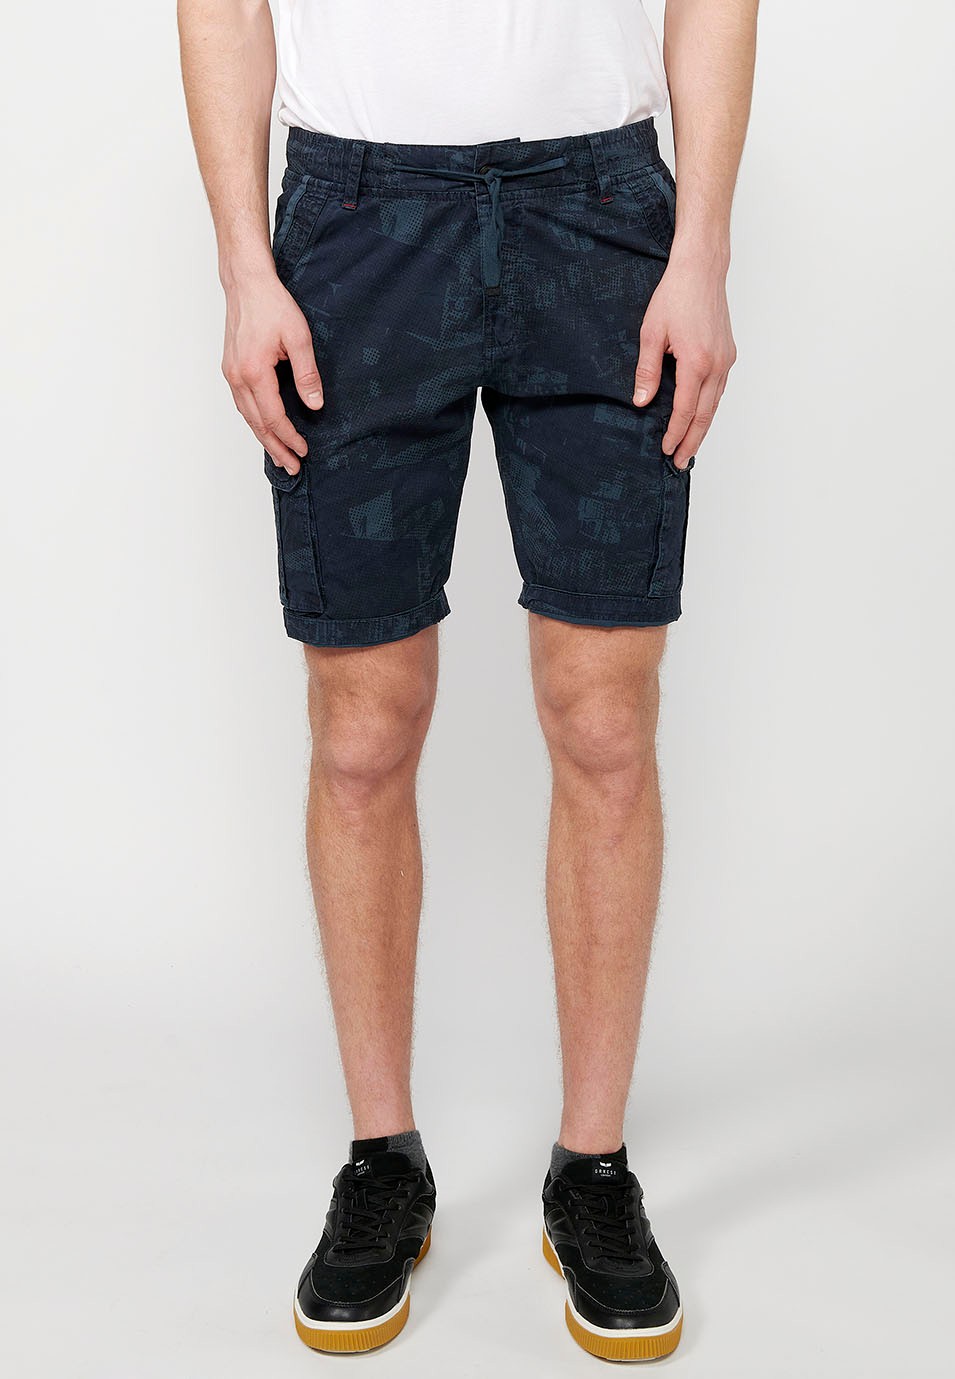 Cargo shorts with front closure with zipper and button and four pockets, two rear pockets with flap with two cargo pockets with flap and adjustable waist with drawstring in Blue for Men 3